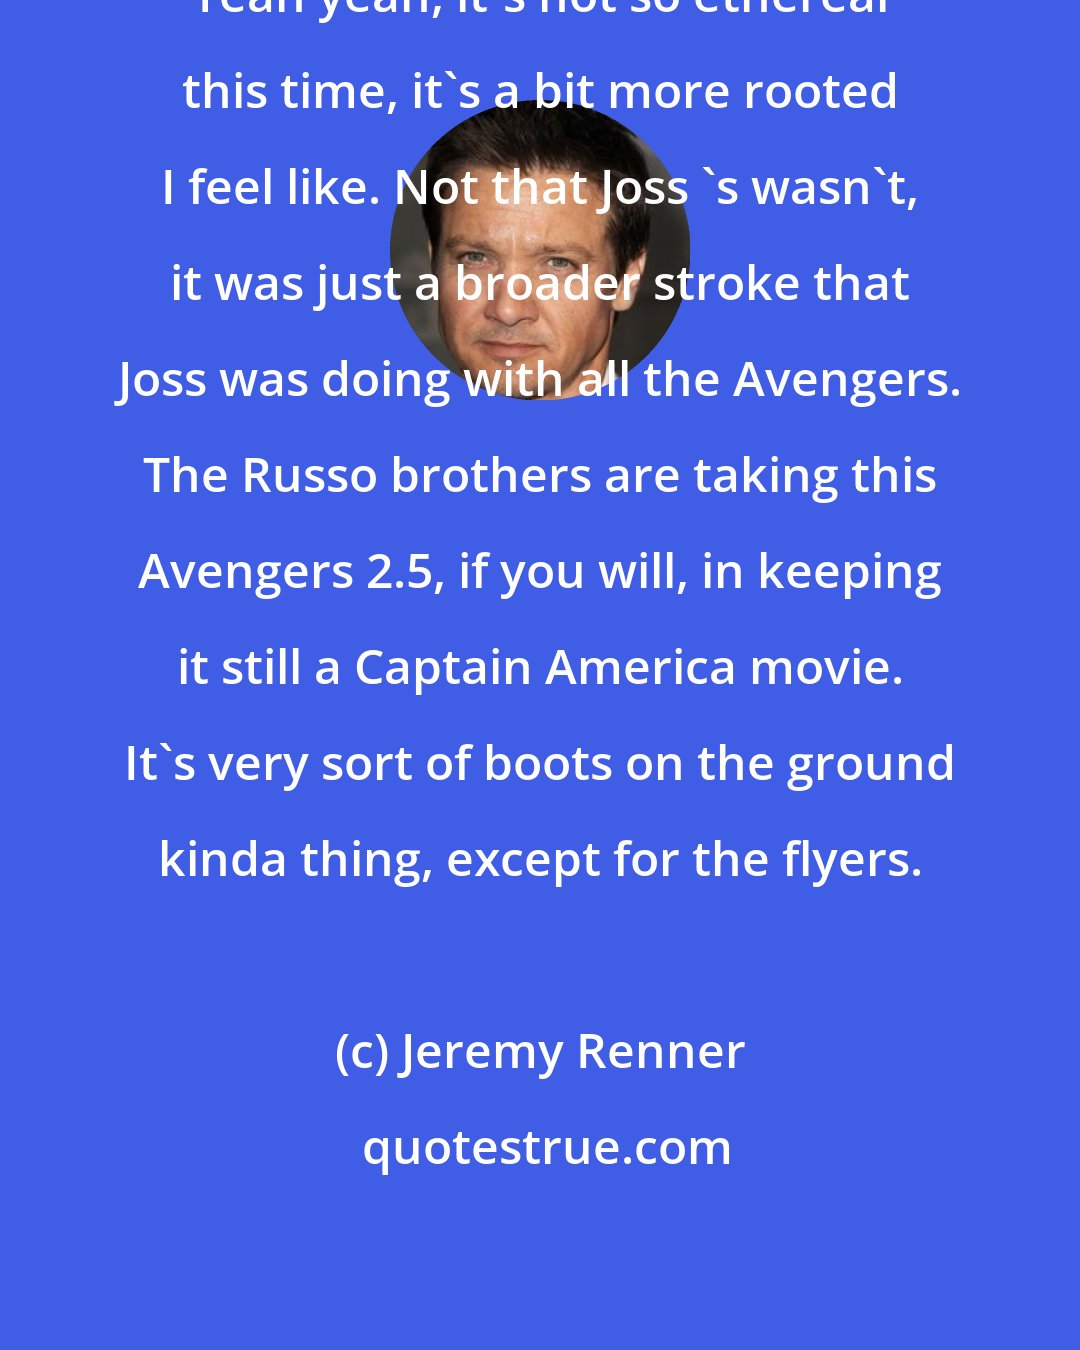 Jeremy Renner: Yeah yeah, it's not so ethereal this time, it's a bit more rooted I feel like. Not that Joss 's wasn't, it was just a broader stroke that Joss was doing with all the Avengers. The Russo brothers are taking this Avengers 2.5, if you will, in keeping it still a Captain America movie. It's very sort of boots on the ground kinda thing, except for the flyers.